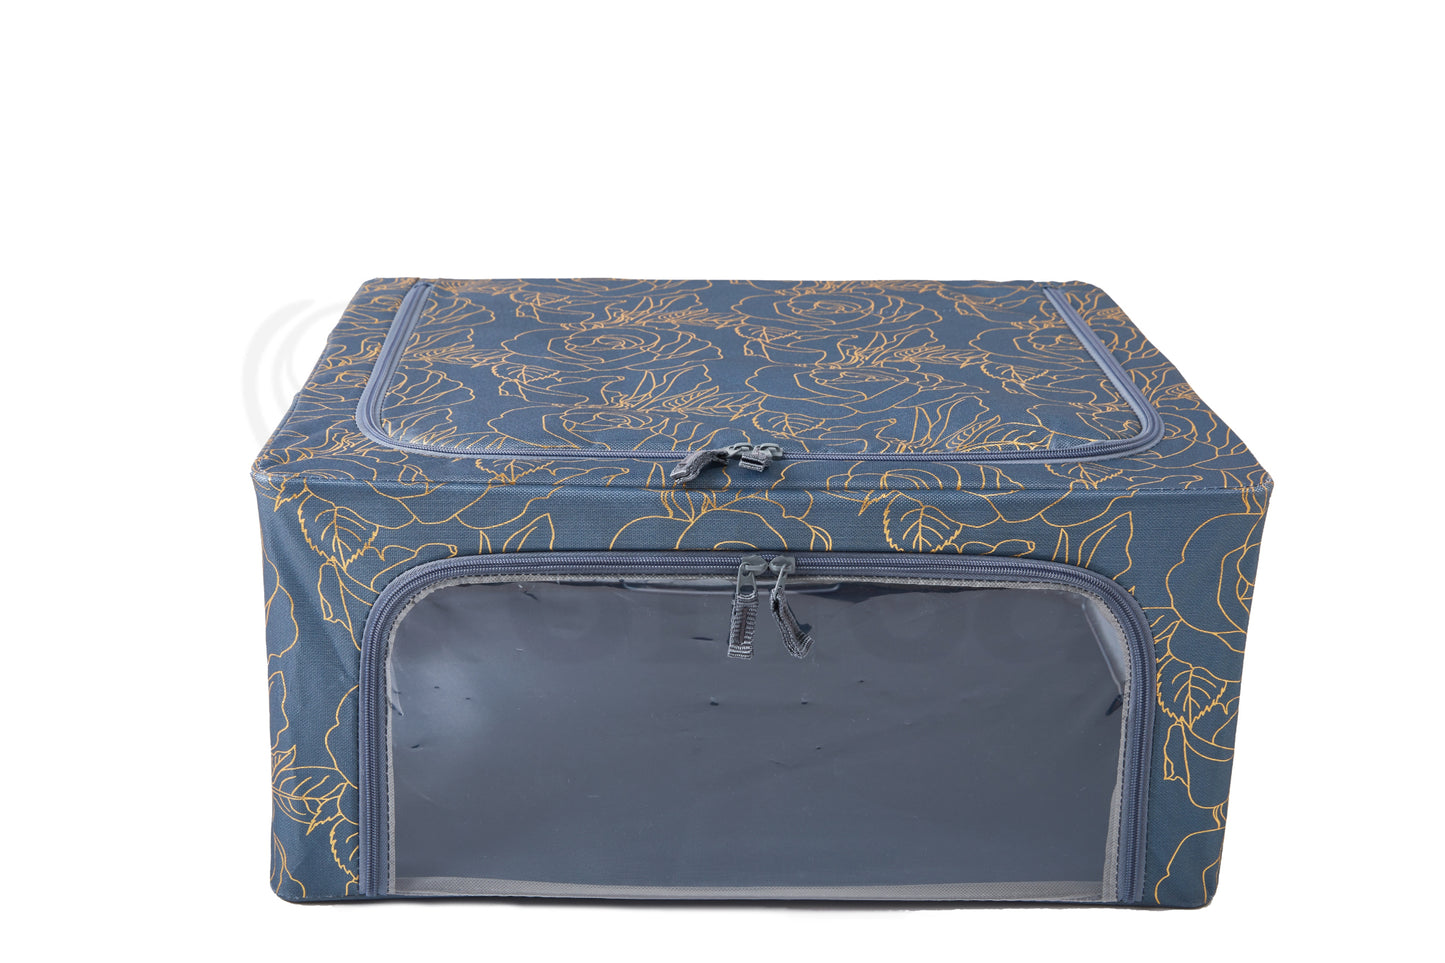 Periea Folding/Collapsible Storage Box - Metallic Floral - Holiday Accent Ltd